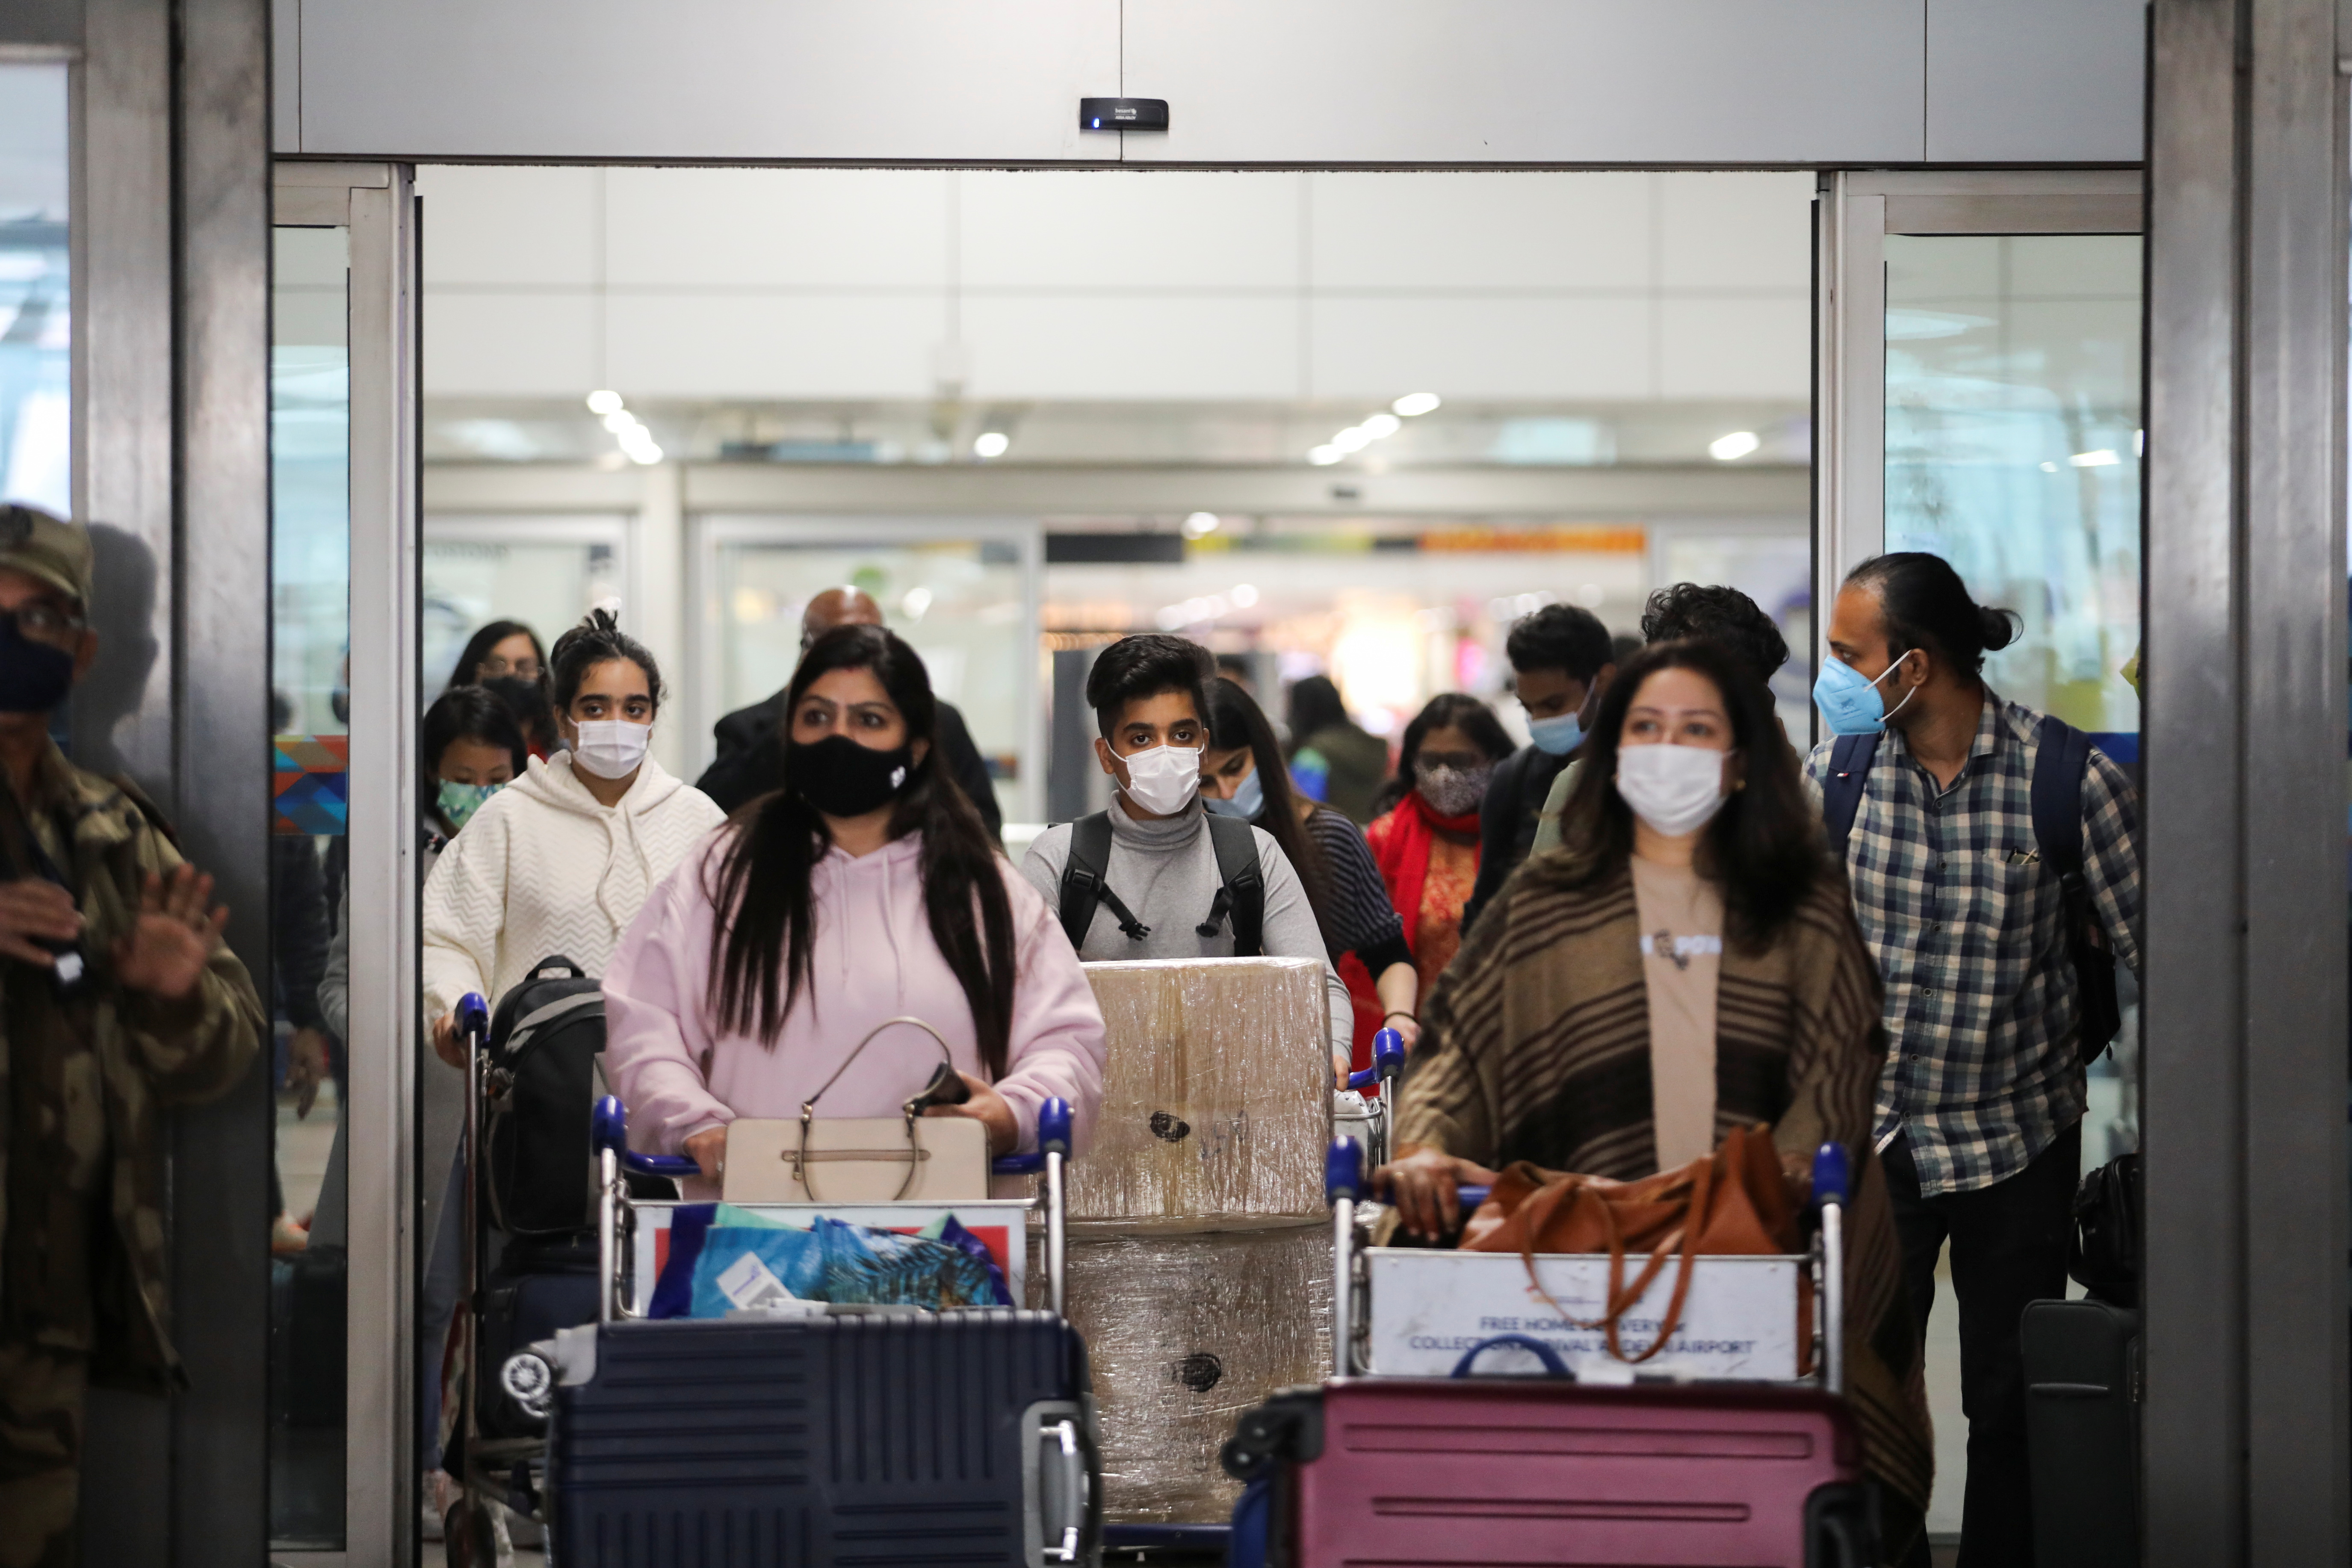 People exit from the arrival section of the Indira Gandhi International Airport in New Delhi, India, December 3, 2021. REUTERS/Anushree Fadnavis